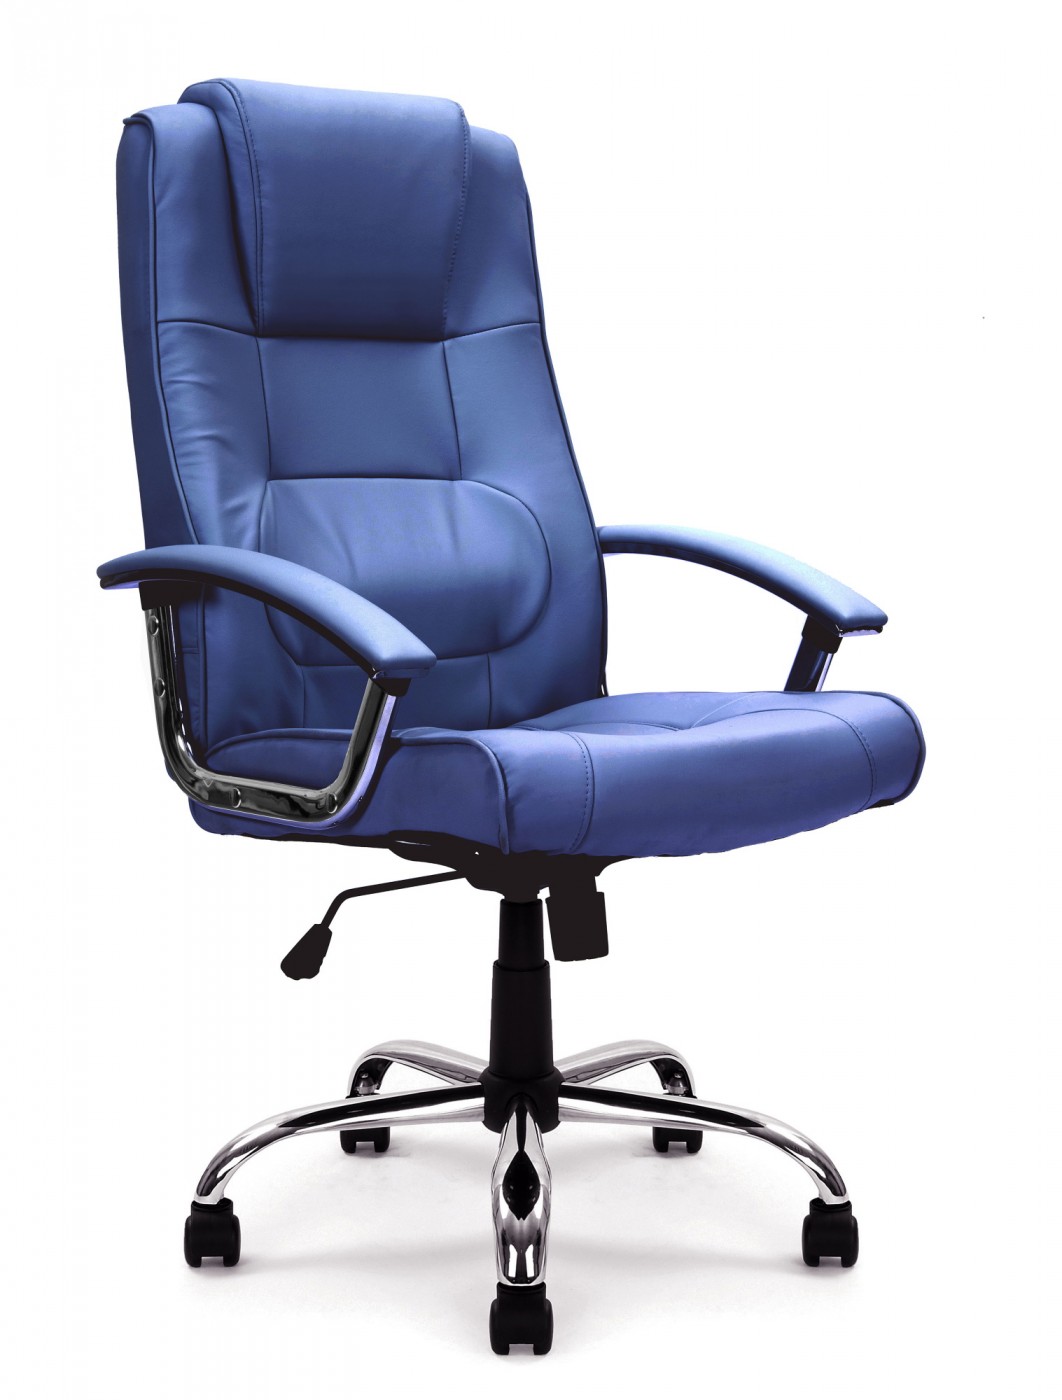 Office Chair Blue Leather Westminster Executive Chair